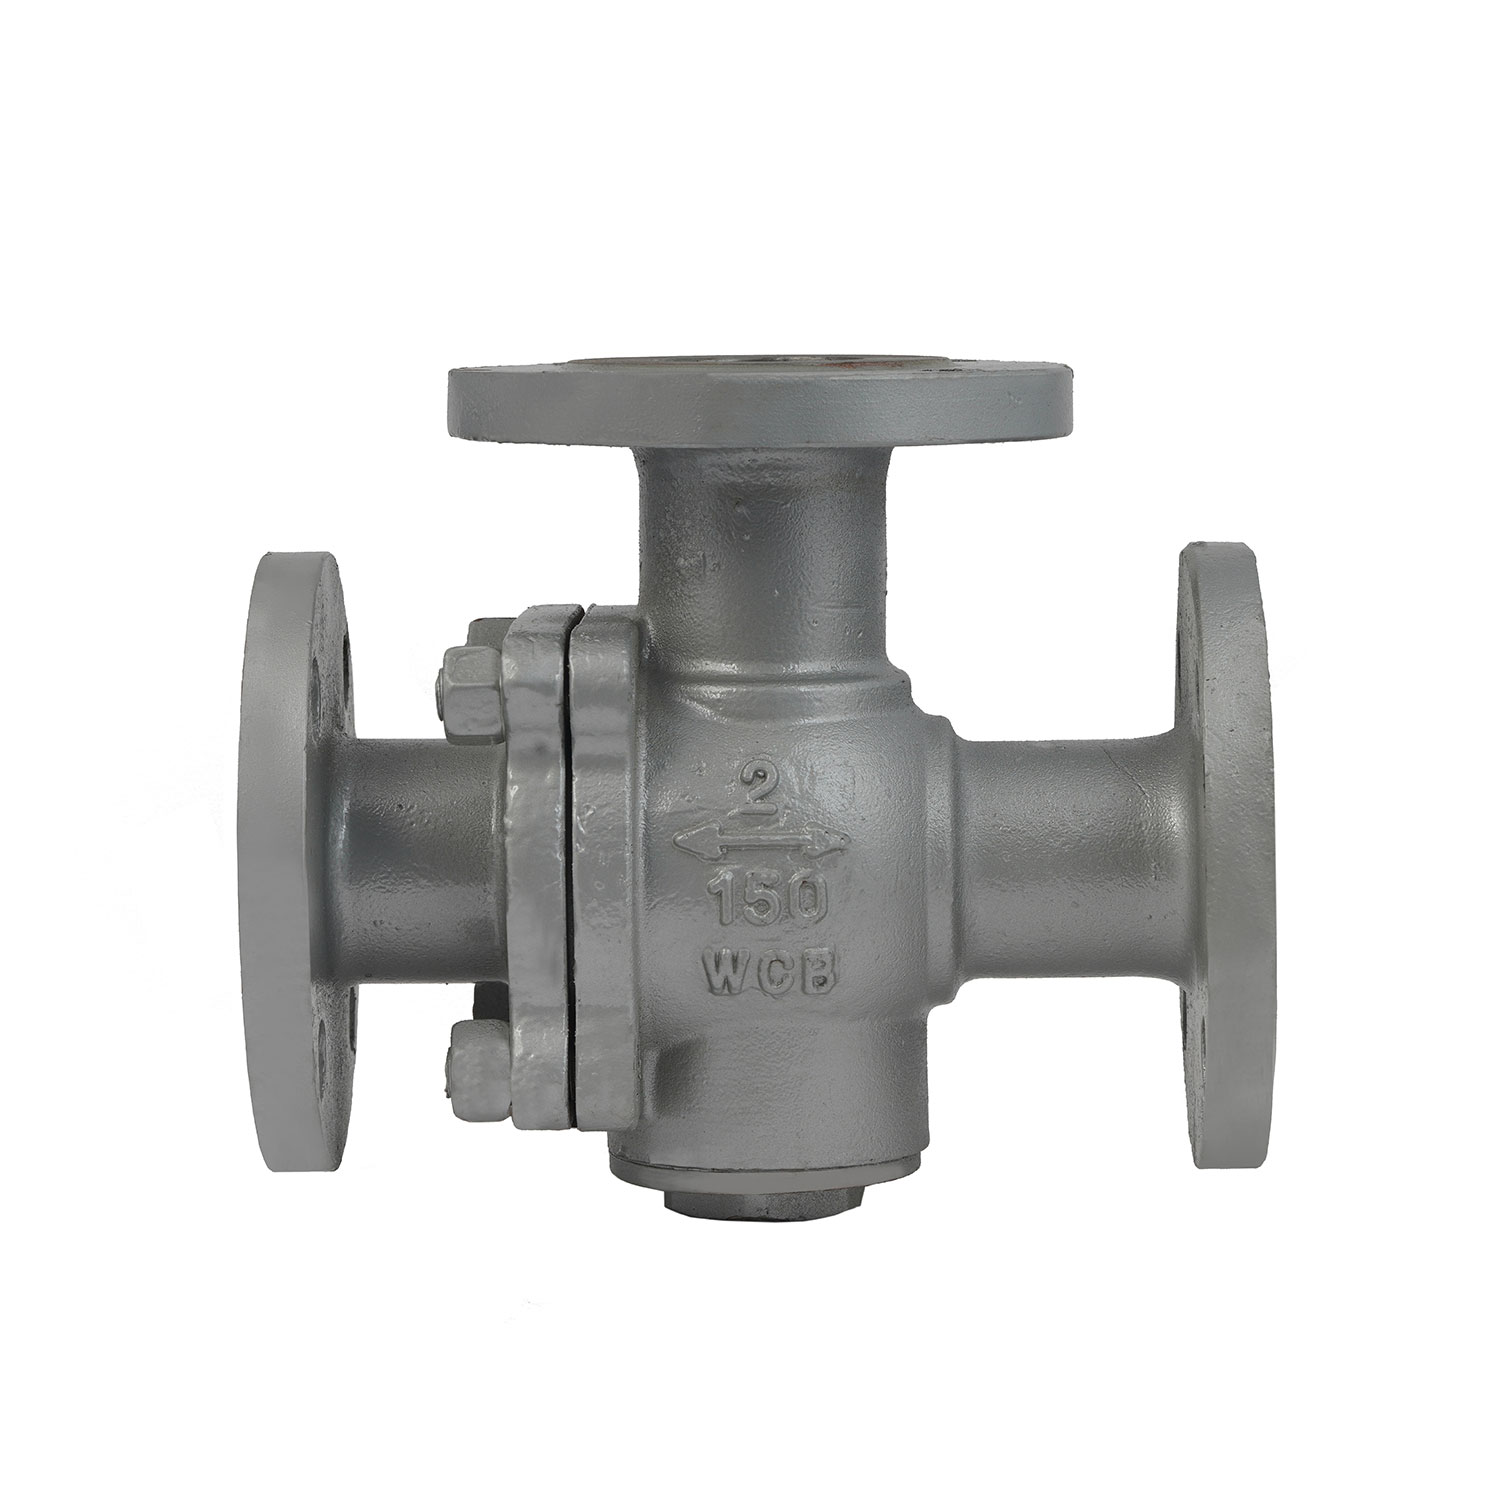 Class 150 Carbon Steel (W.C.B) Flanged End Three Ball Valve With (KITZ) Brand